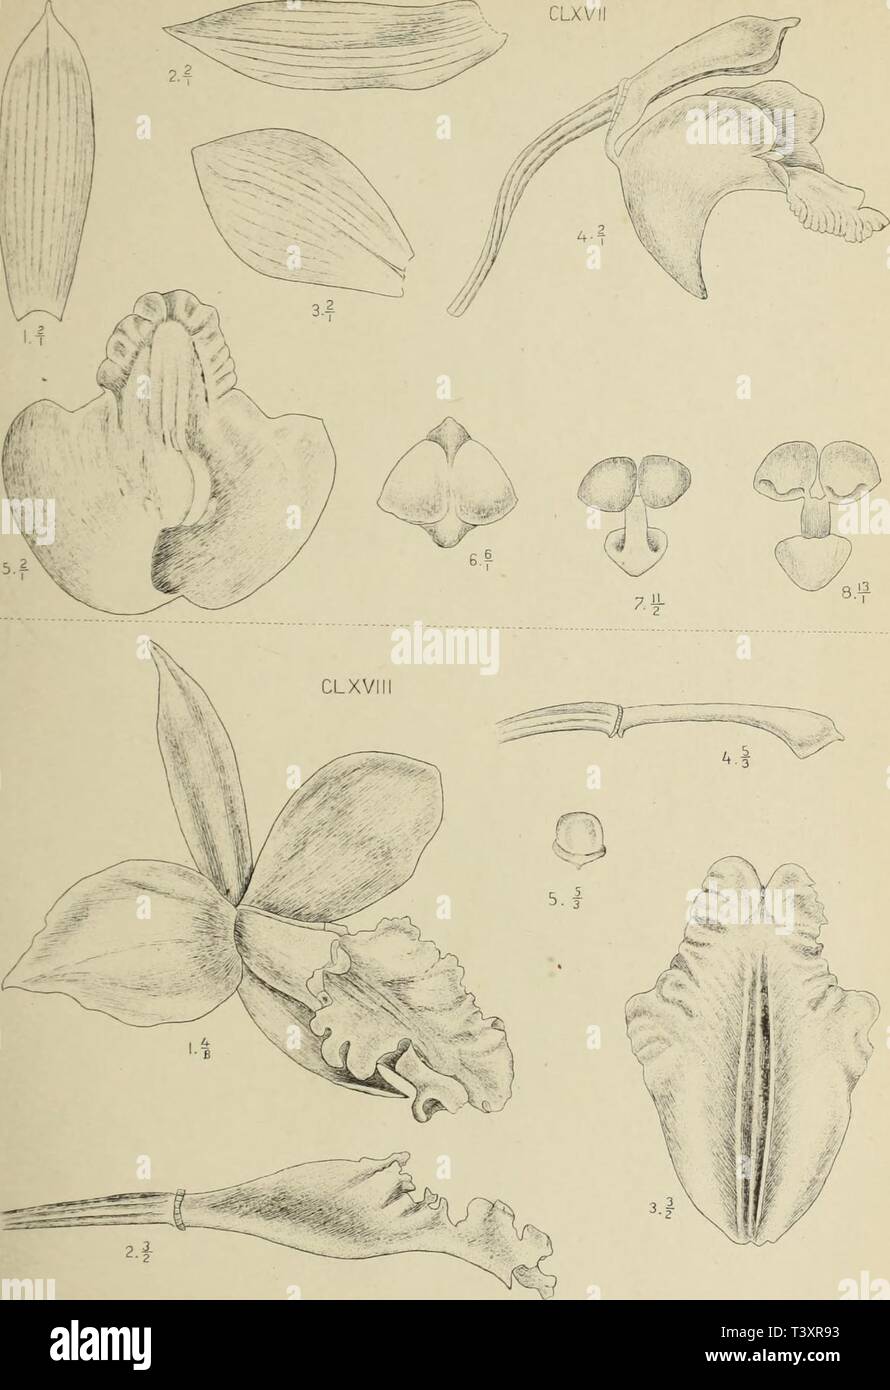 Archive image from page 150 of Die orchideen von Java (1905). Die orchideen von Java  dieorchideenvonj16smit Year: 1905  M.Kromohardjo lith. CLxvn.Eulophia eooaltata Rchb.f. clw//. Arundina speciosa Bl. Stock Photo